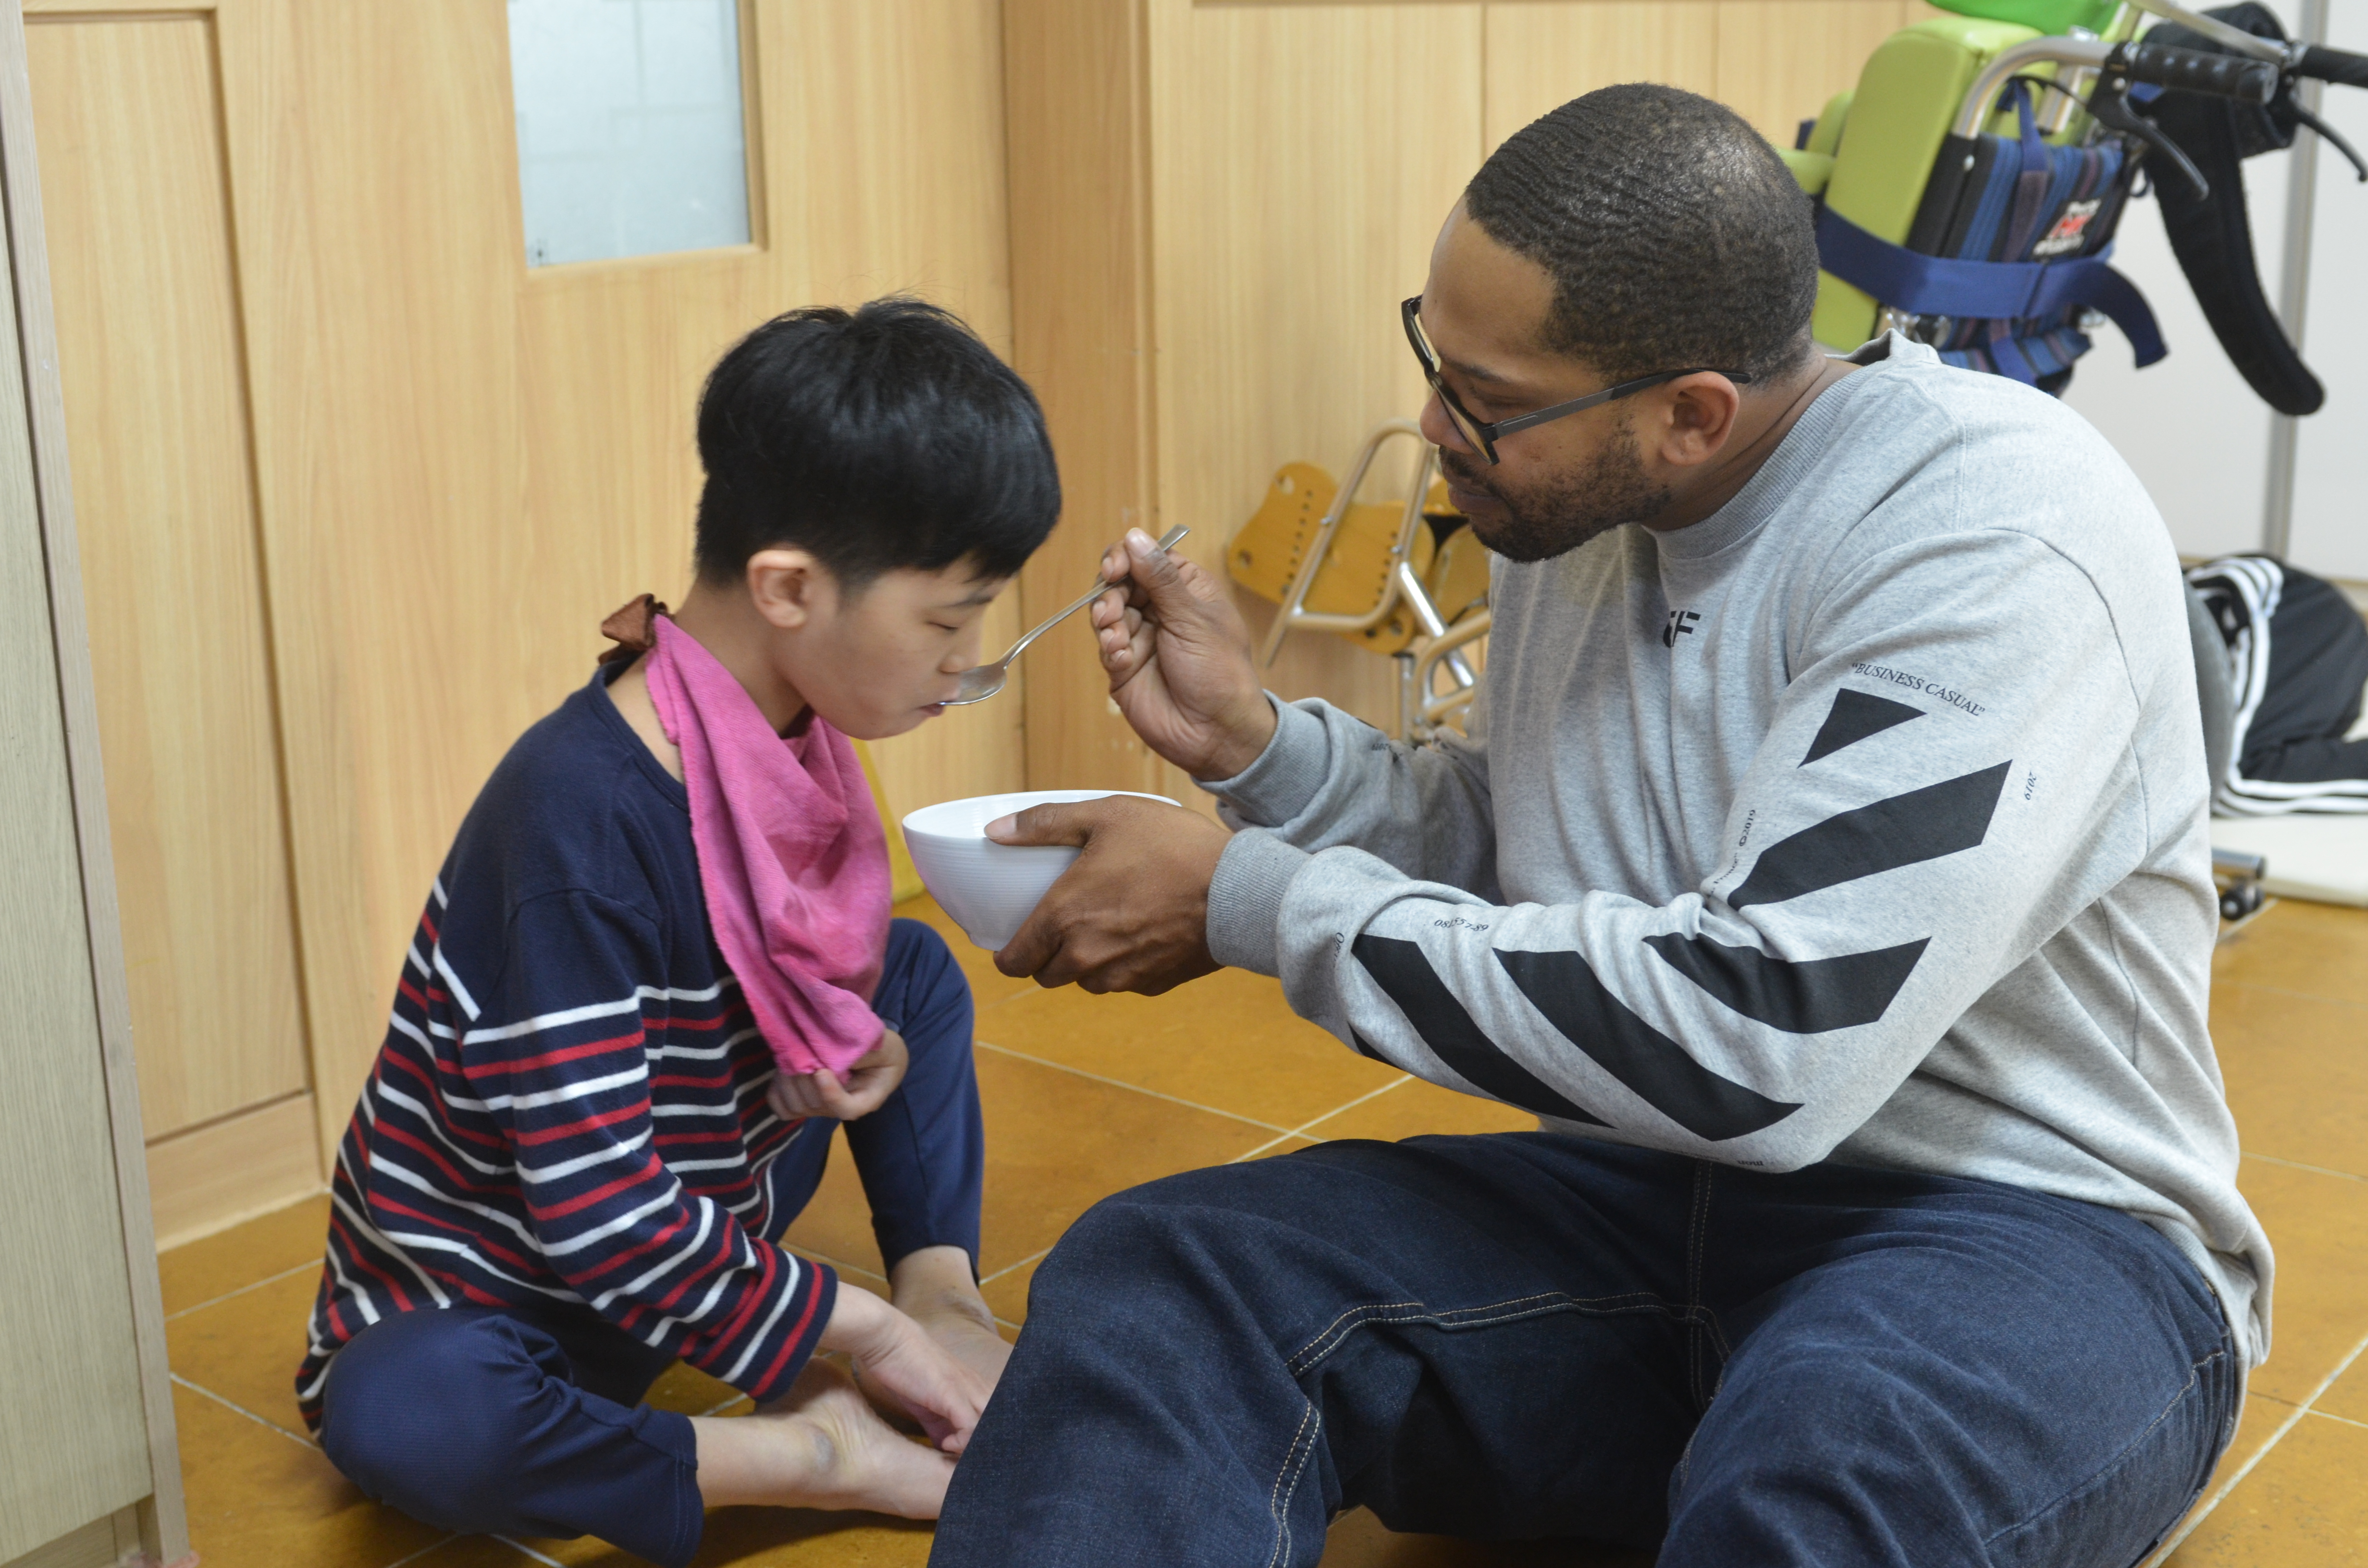 A soldier feeds a special needs resident in an orphanage.